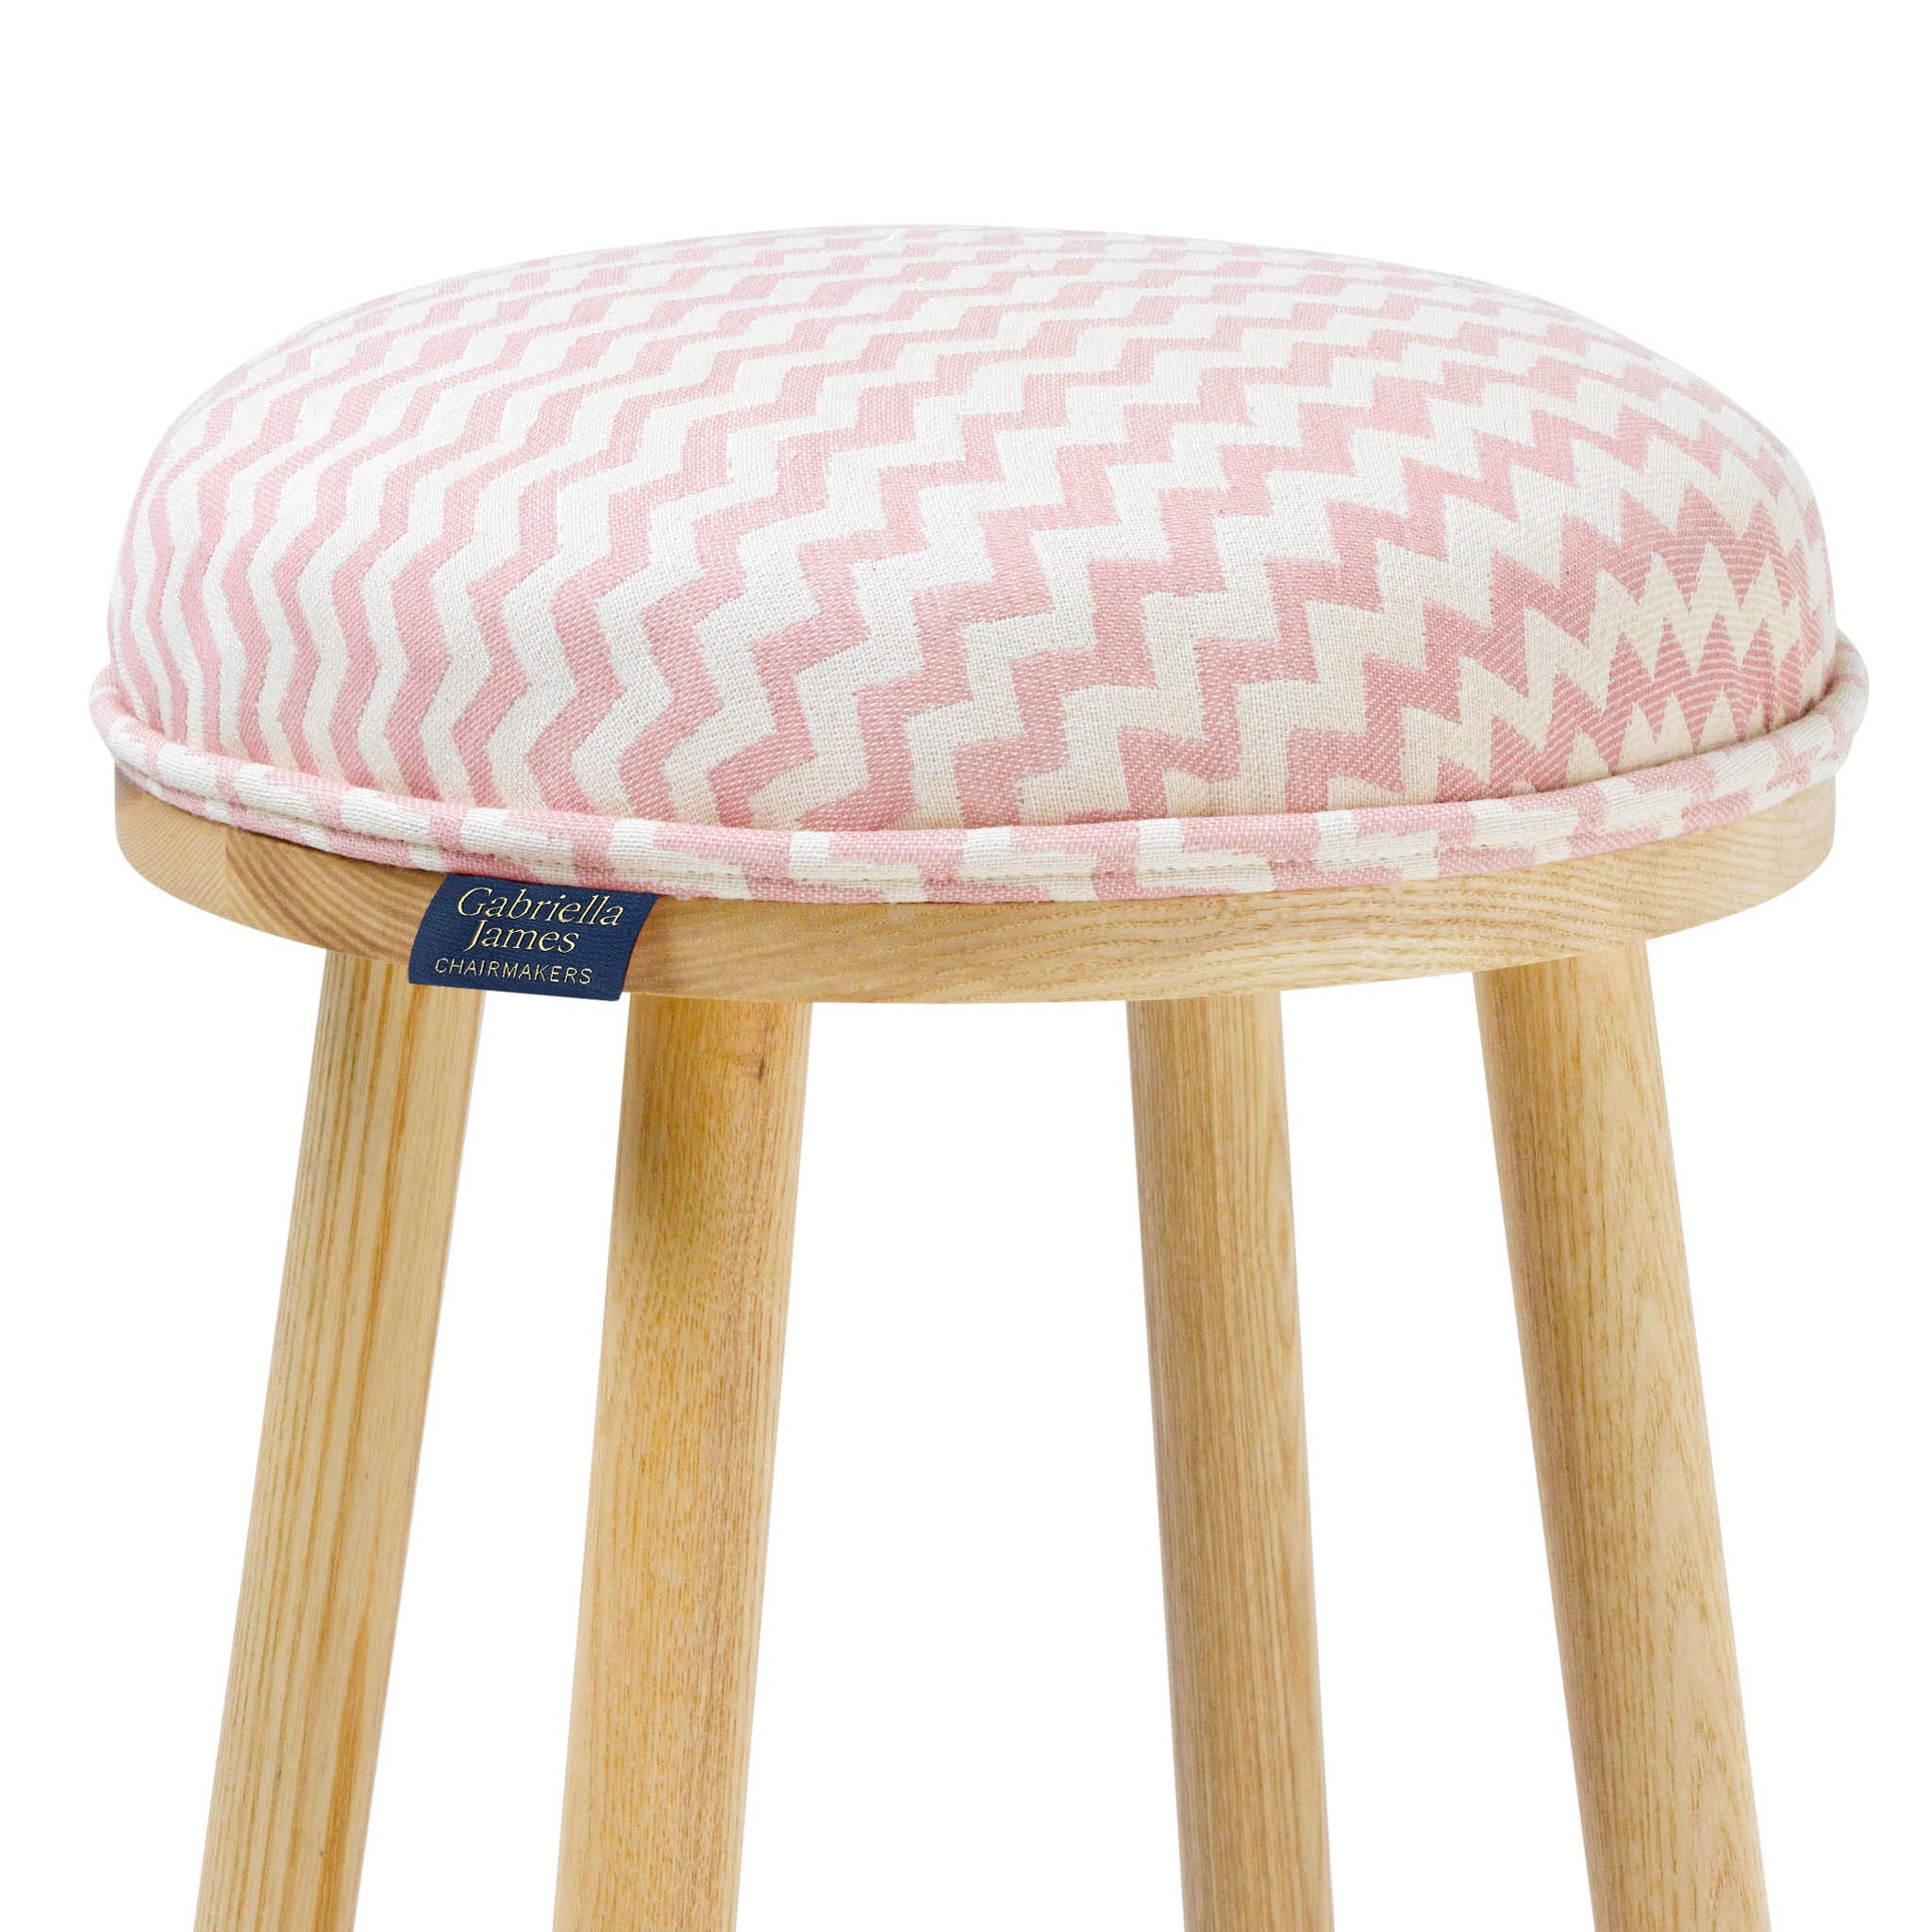 Turner Counter Stool Upholstered in Climbing Chevy from Tori Murphy